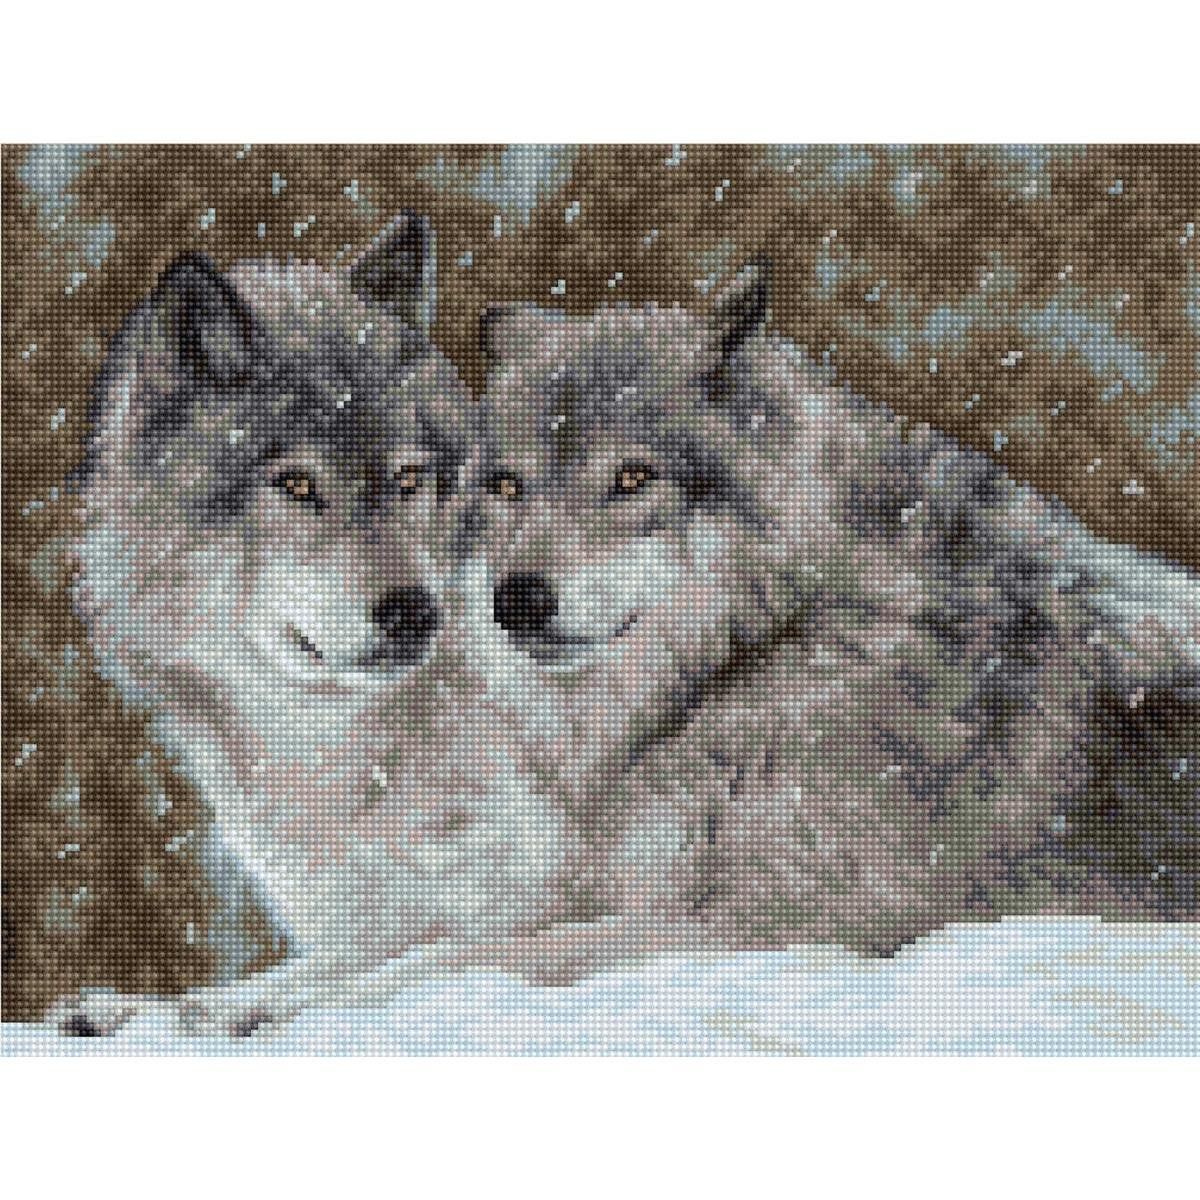 A detailed cross-stitch artwork shows two wolves lying...